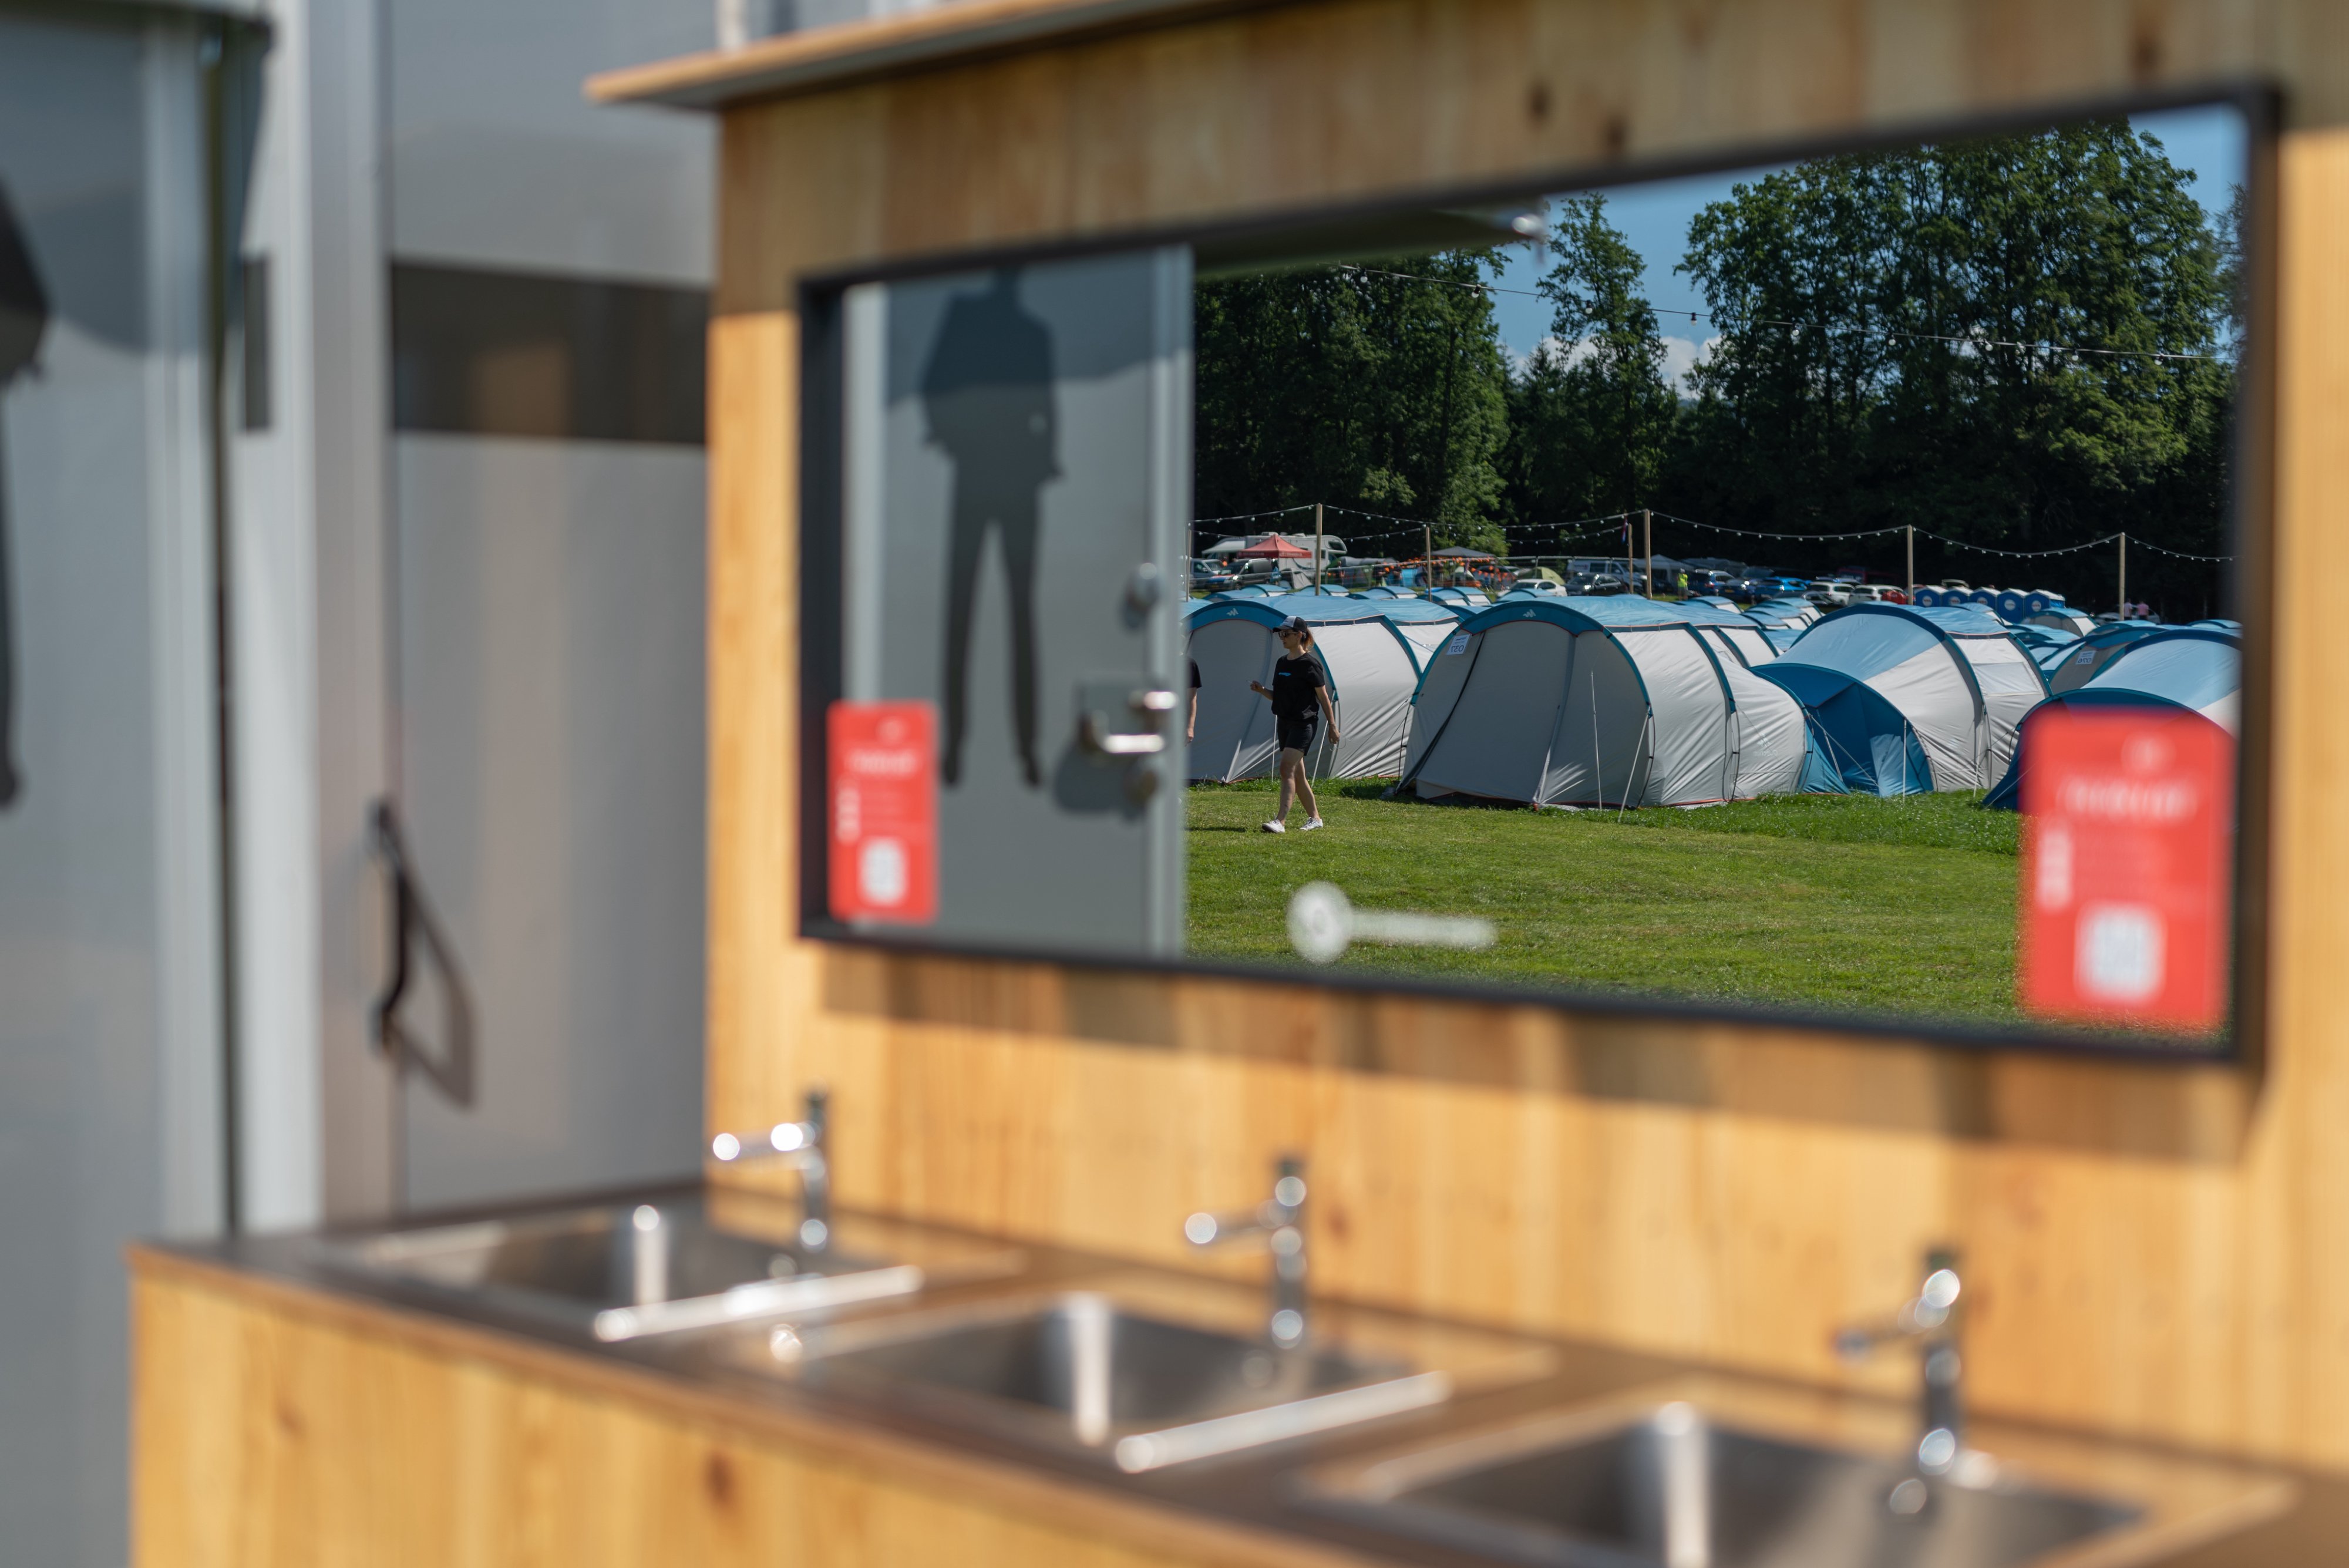 Are you not used to camping and worry about the hygiene and cleanliness of the camp? Do not worry anymore! GPtents is the tidiest camp by the Formula 1 circuit.